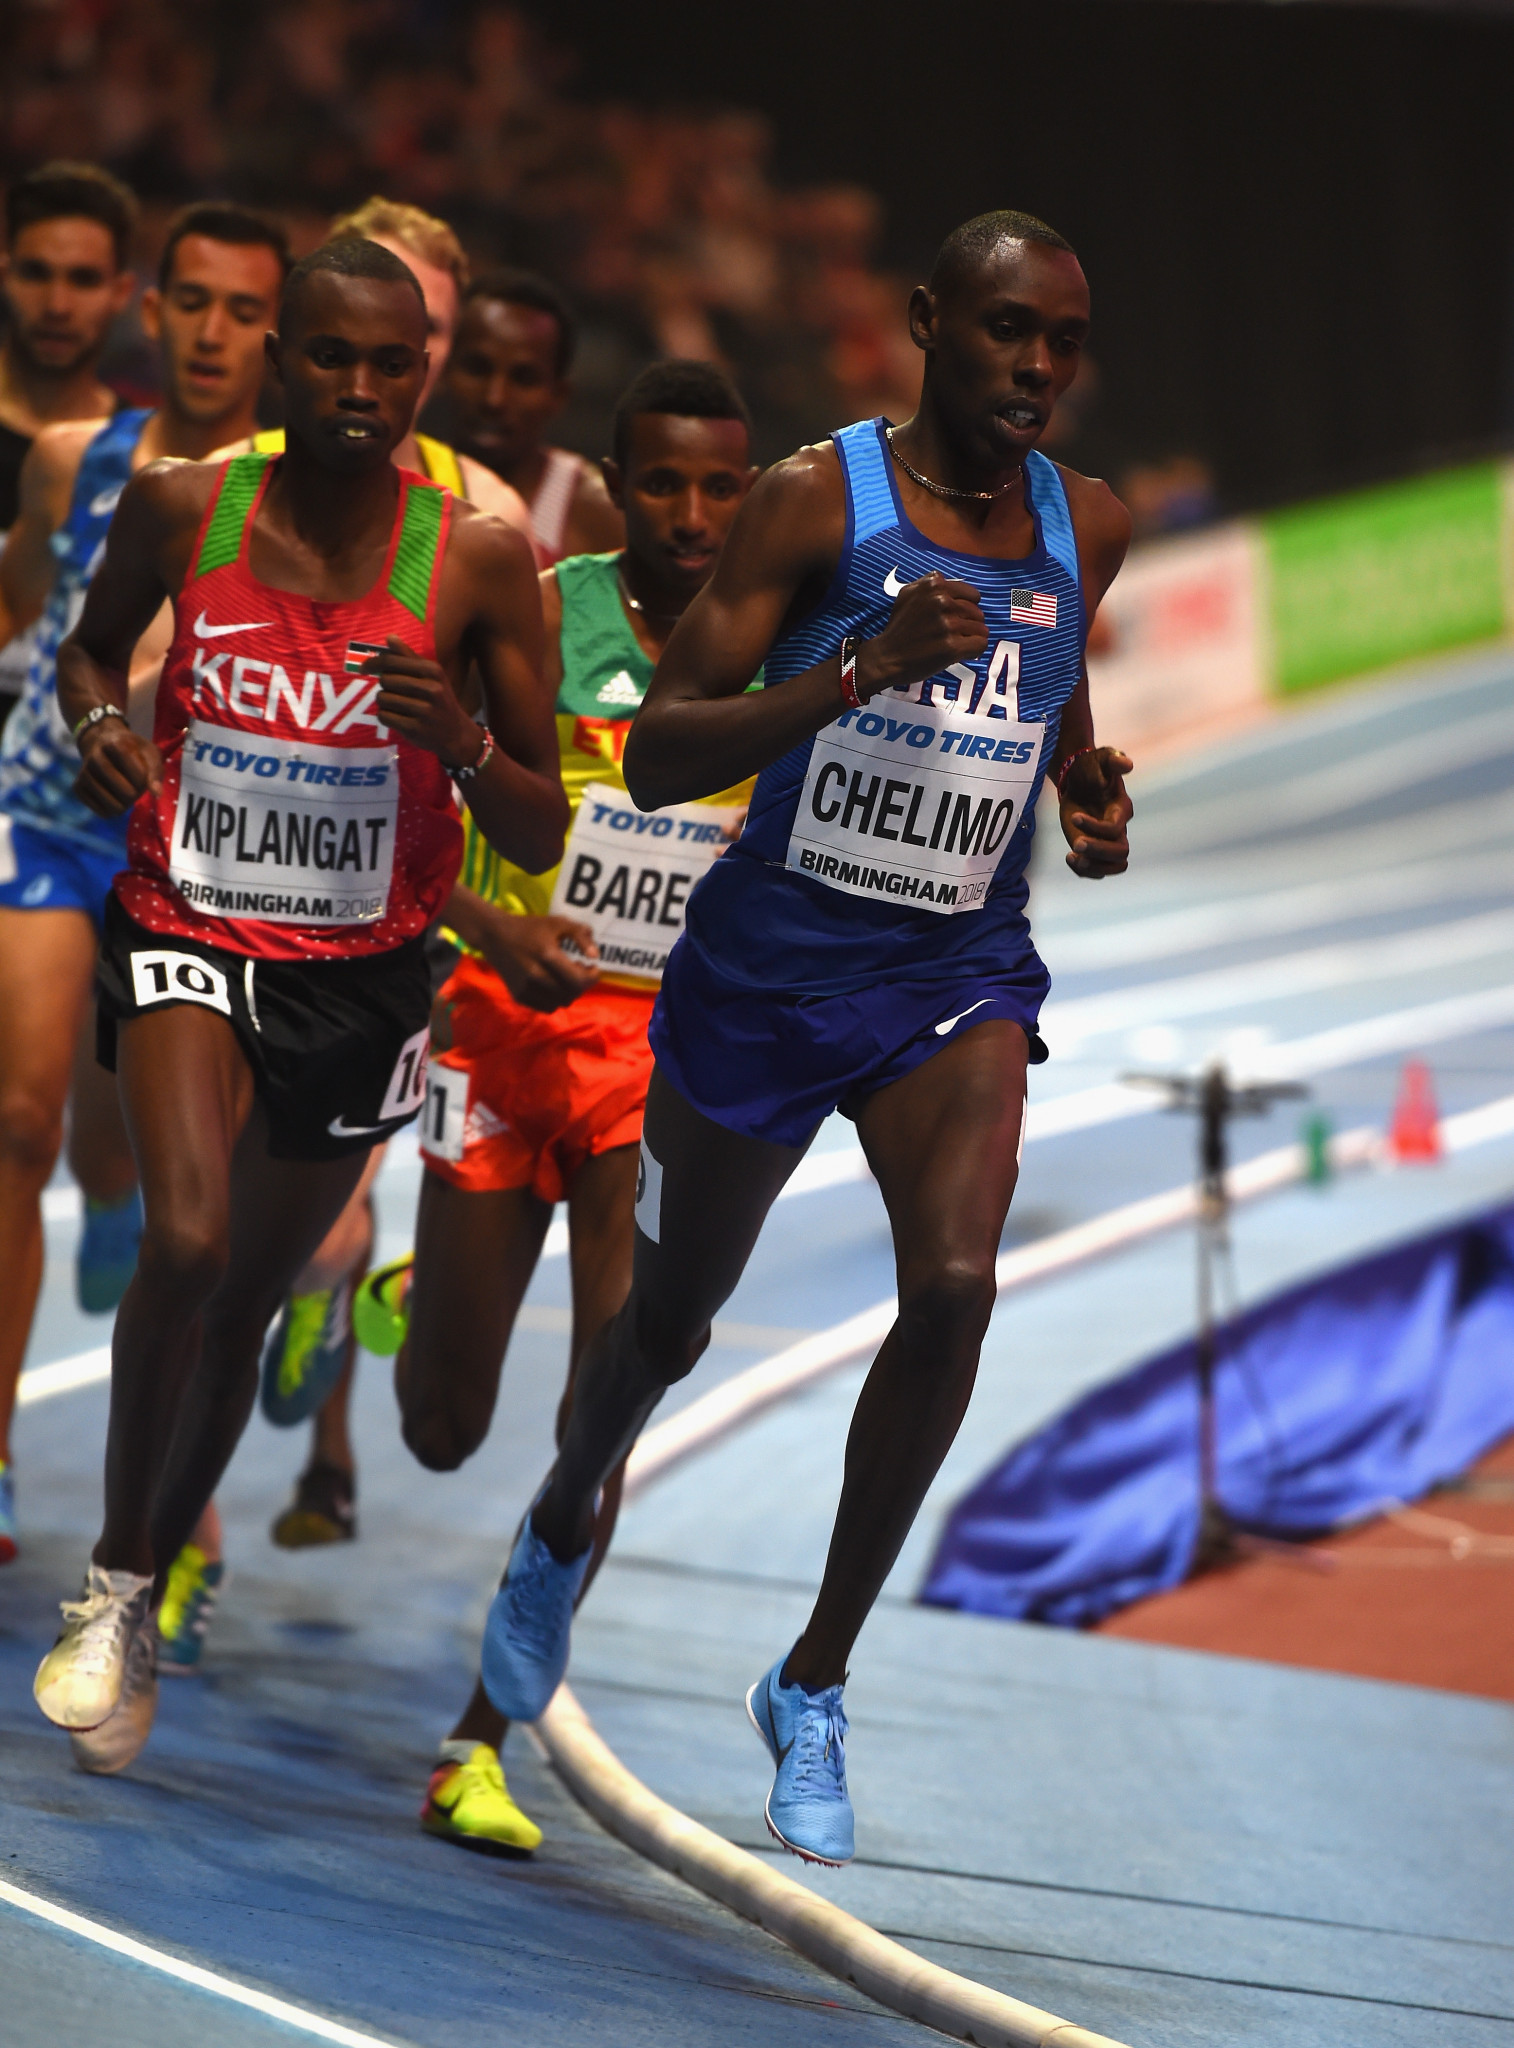 America's Paul Chelimo was one of more than 20 athletes disqualified at the World Indoor Championships - mostly for stepping on or over the line of their lanes, prompting discussion over possible rule changes ©Getty Images